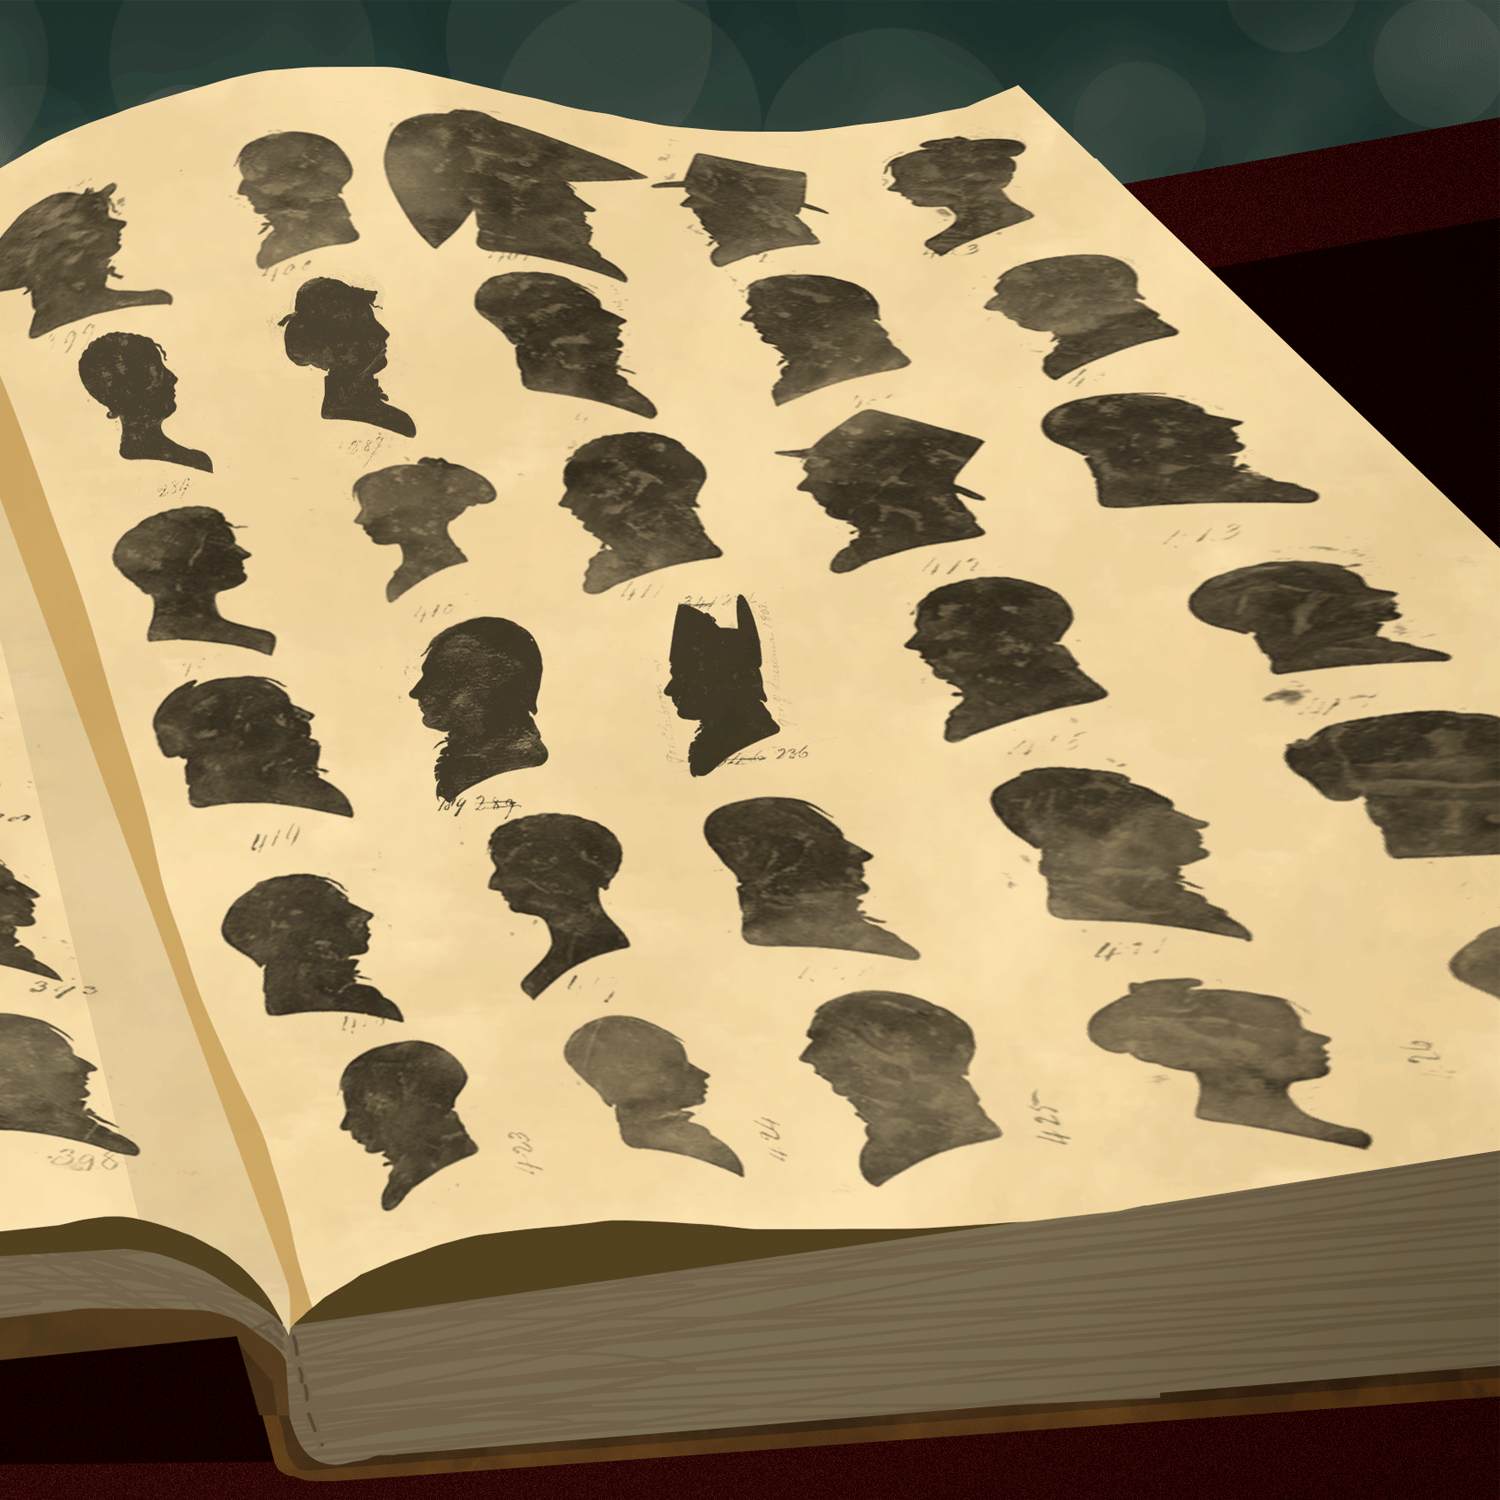 The Toxic Book of Faces